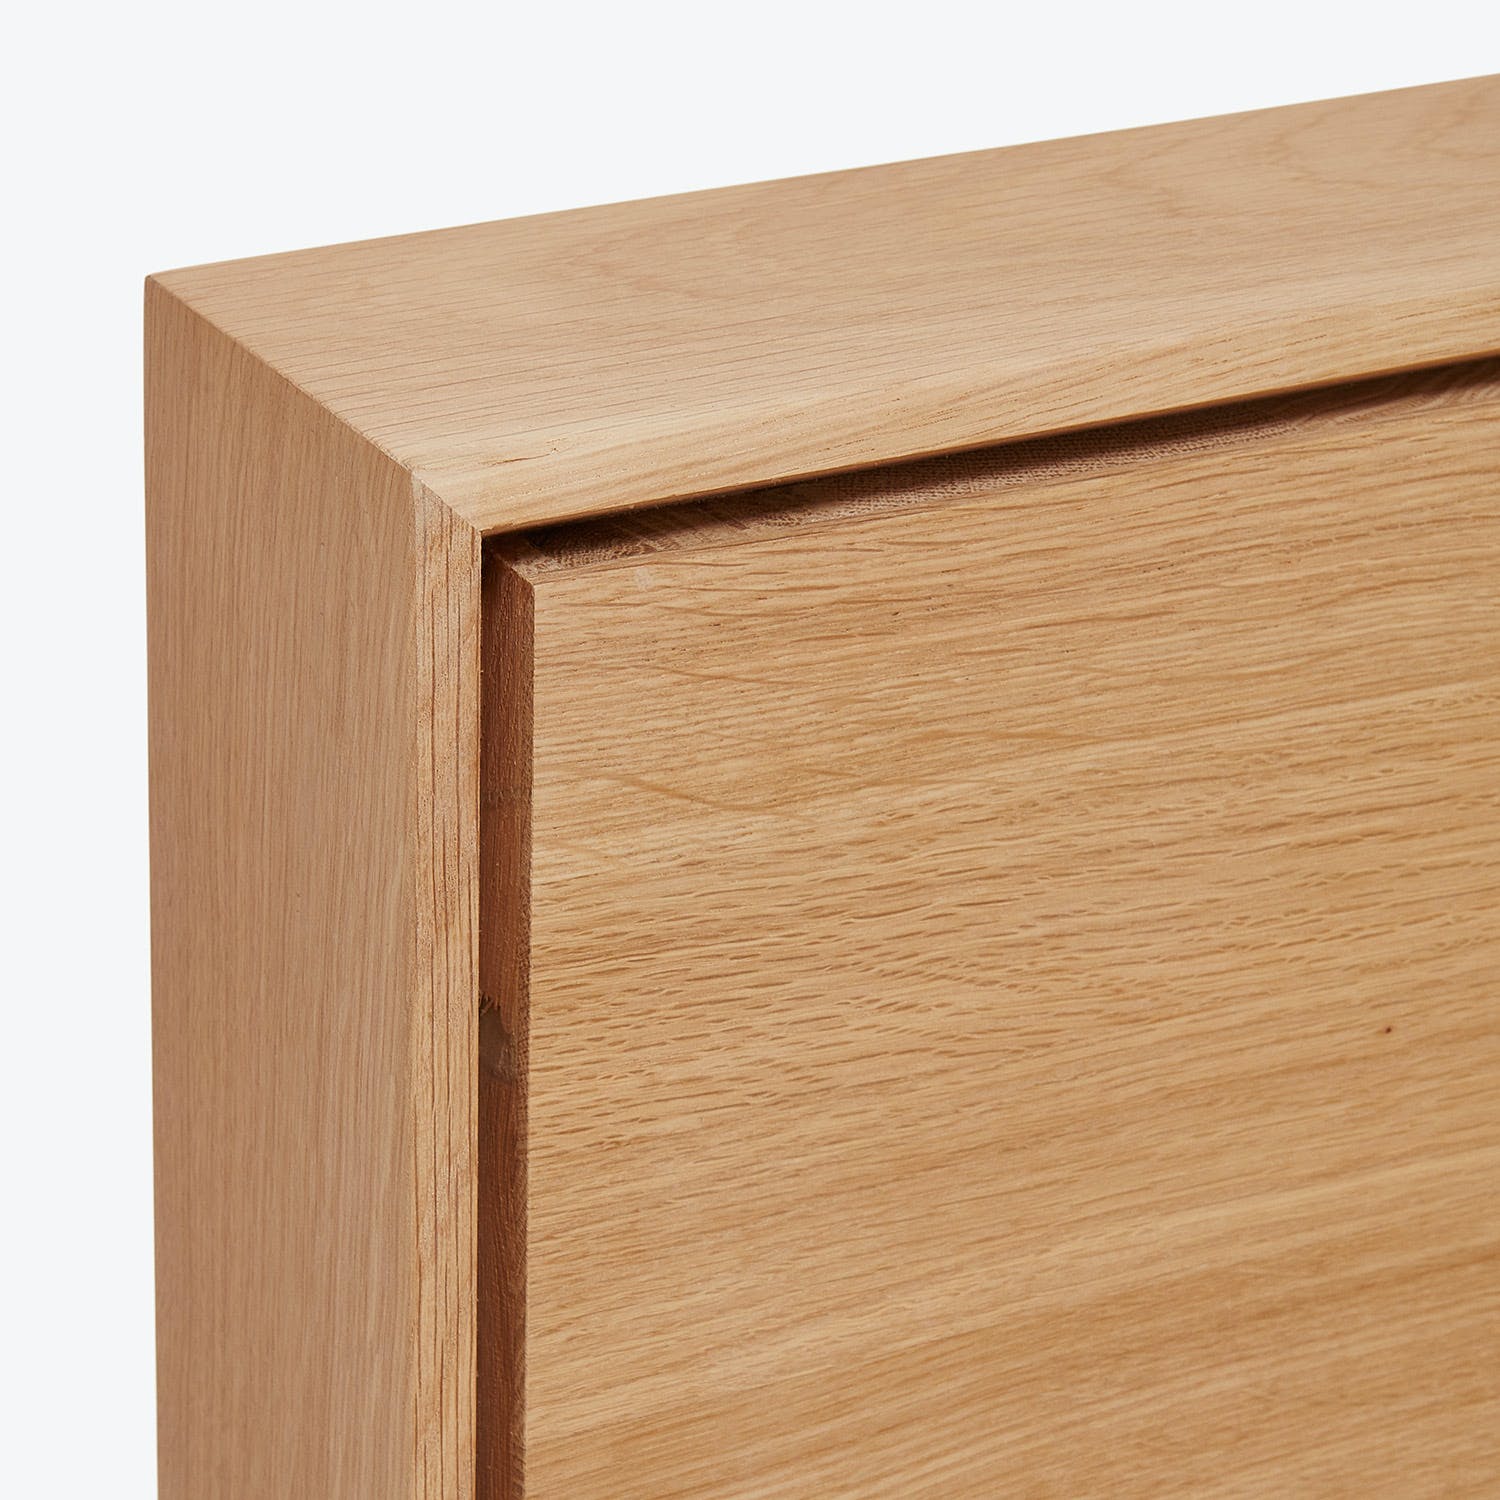 Expertly crafted oak corner joint showcases clean minimalist design aesthetic.